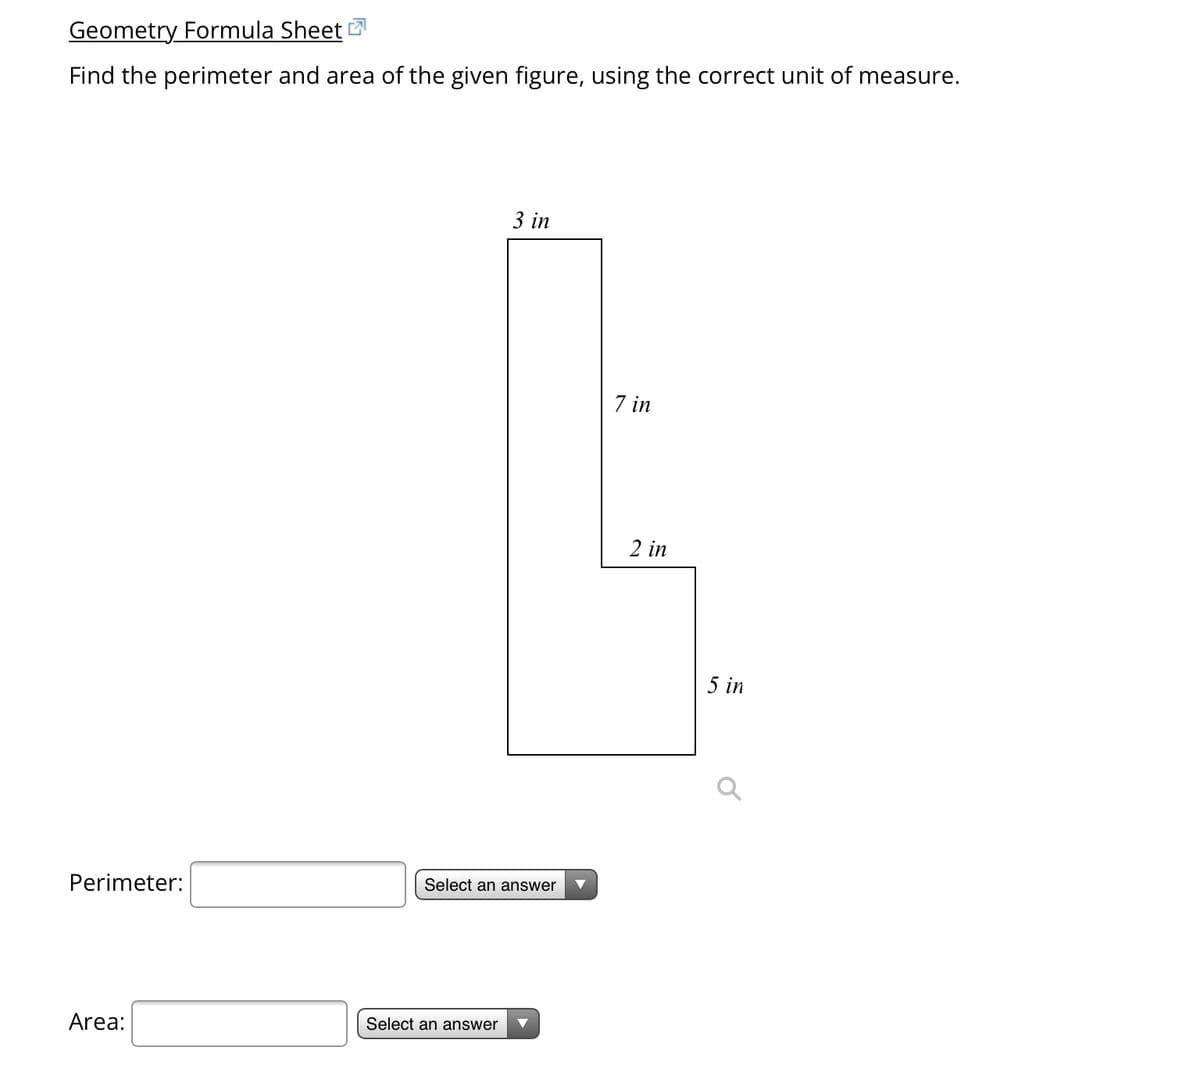 Geometry Formula Sheet
Find the perimeter and area of the given figure, using the correct unit of measure.
Perimeter:
Area:
3 in
Select an answer
Select an answer
7 in
2 in
5 in
O